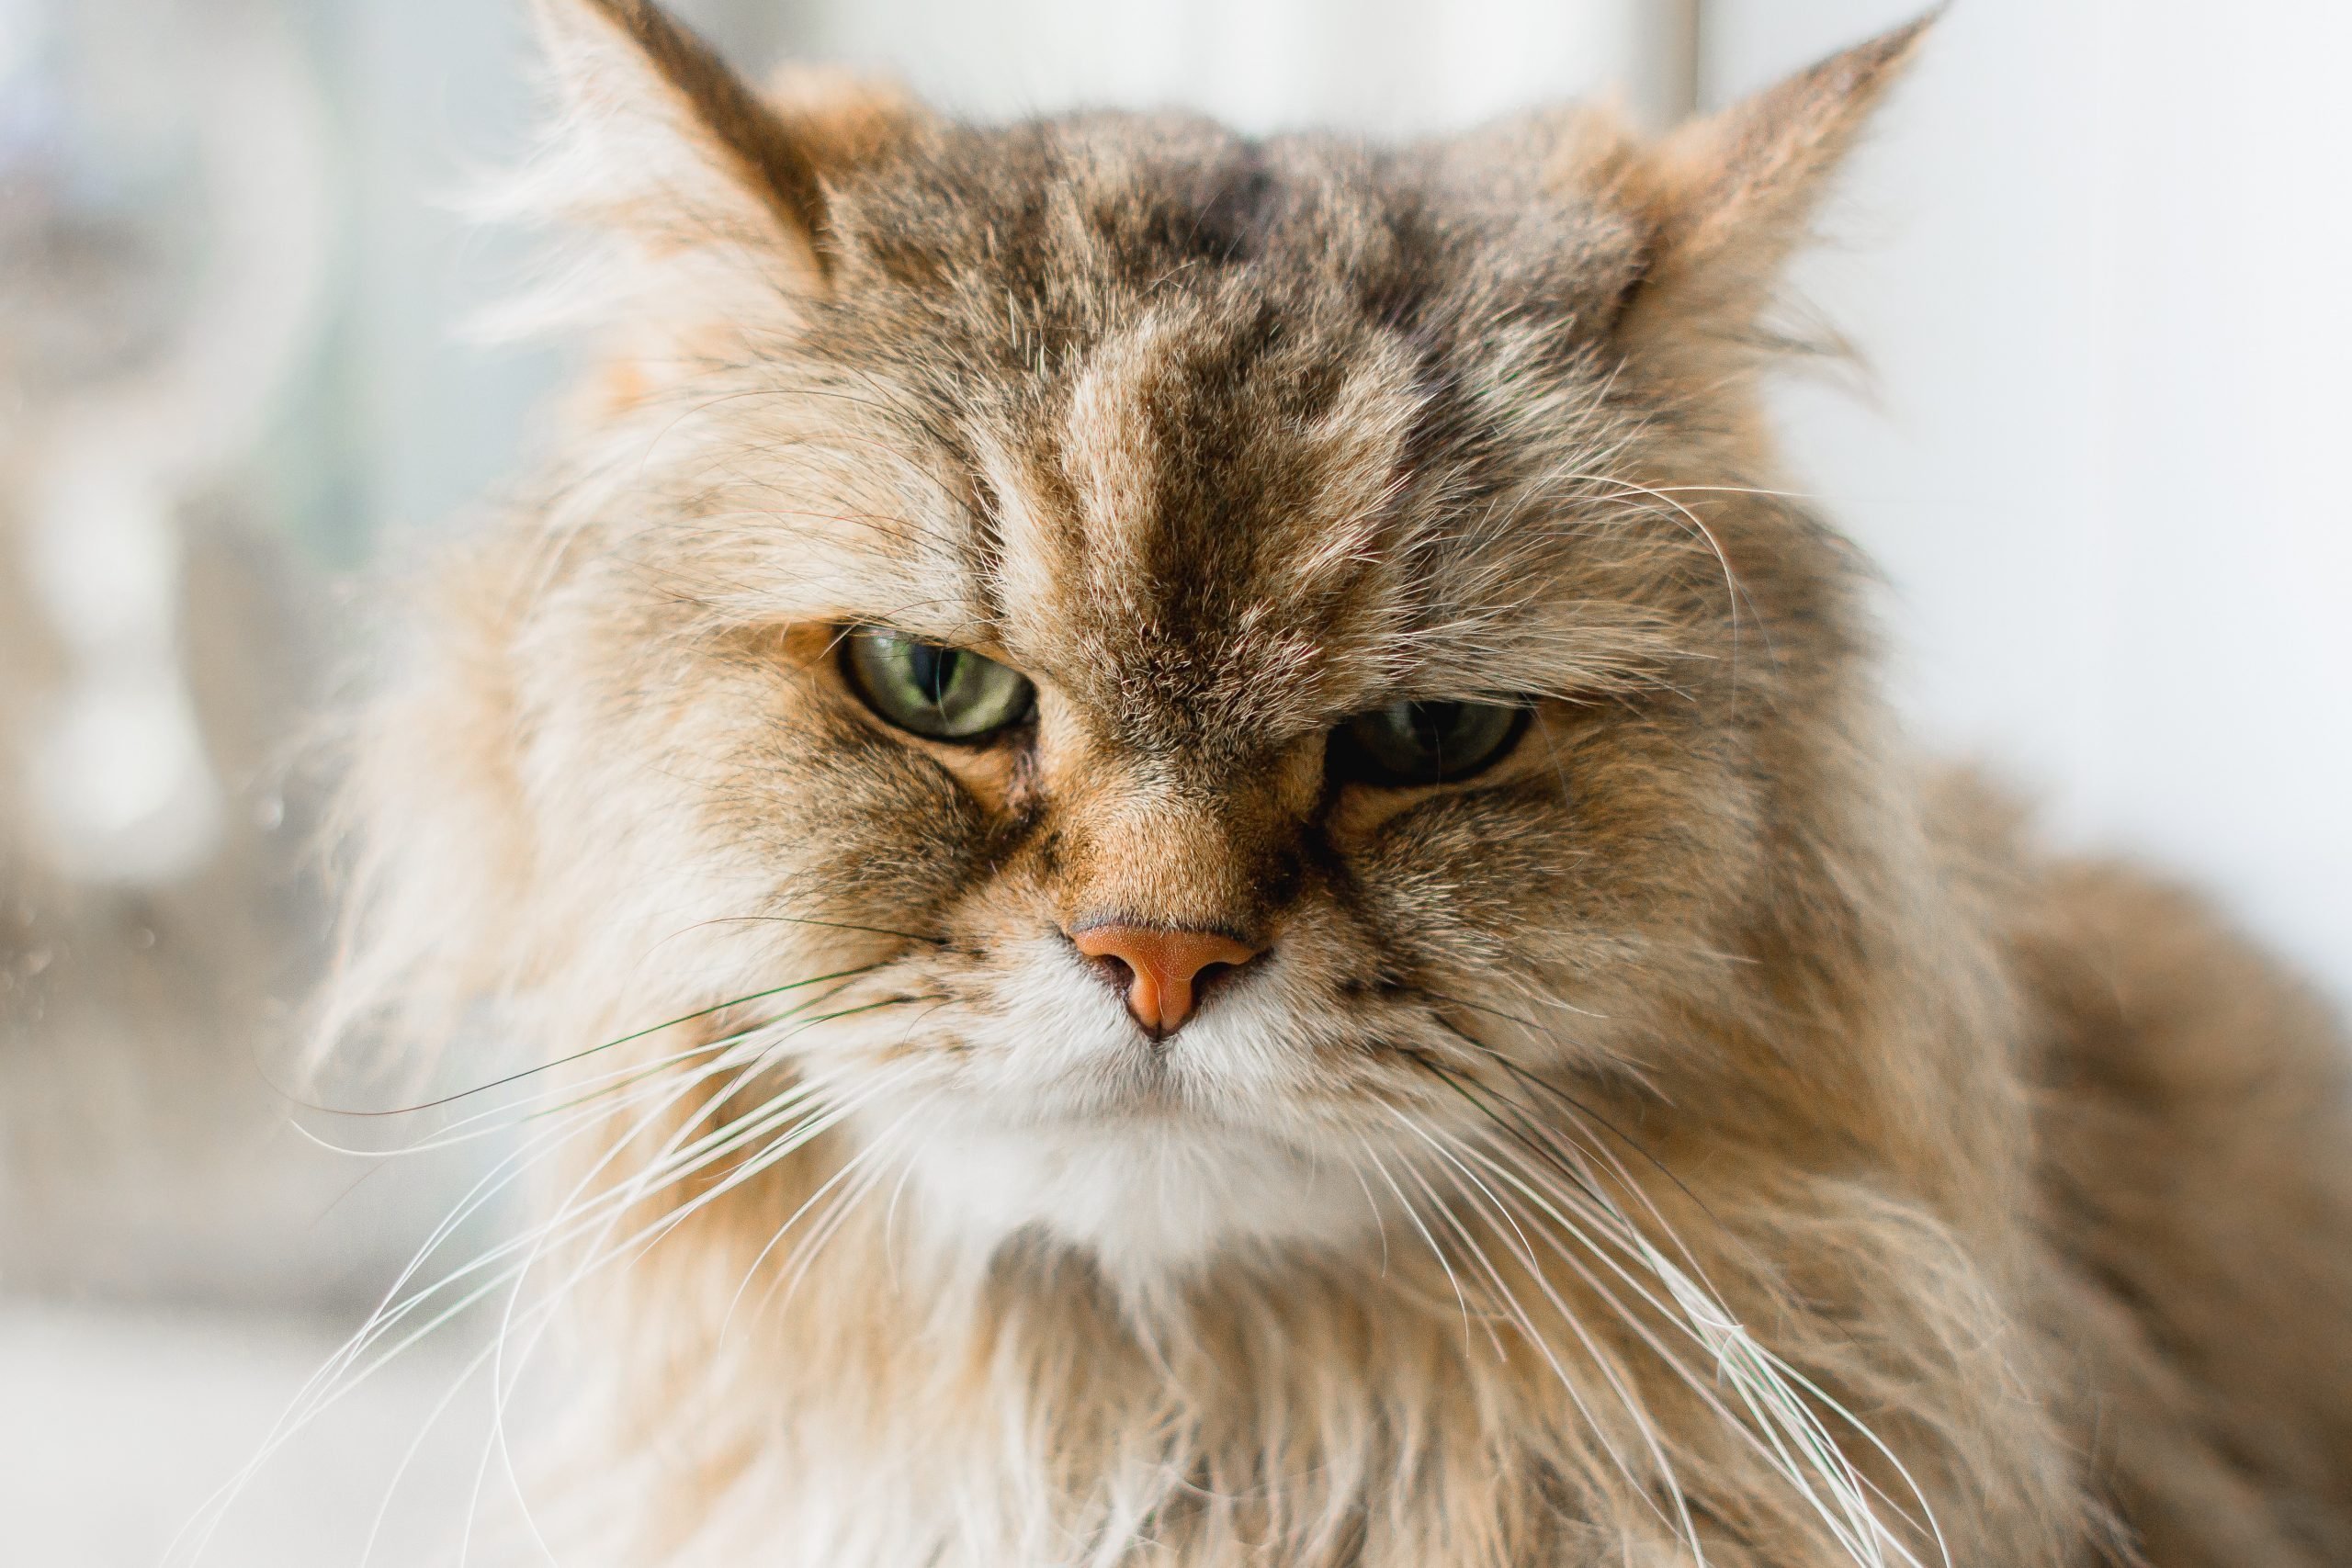 Angry cat keeps couple out of home for hours